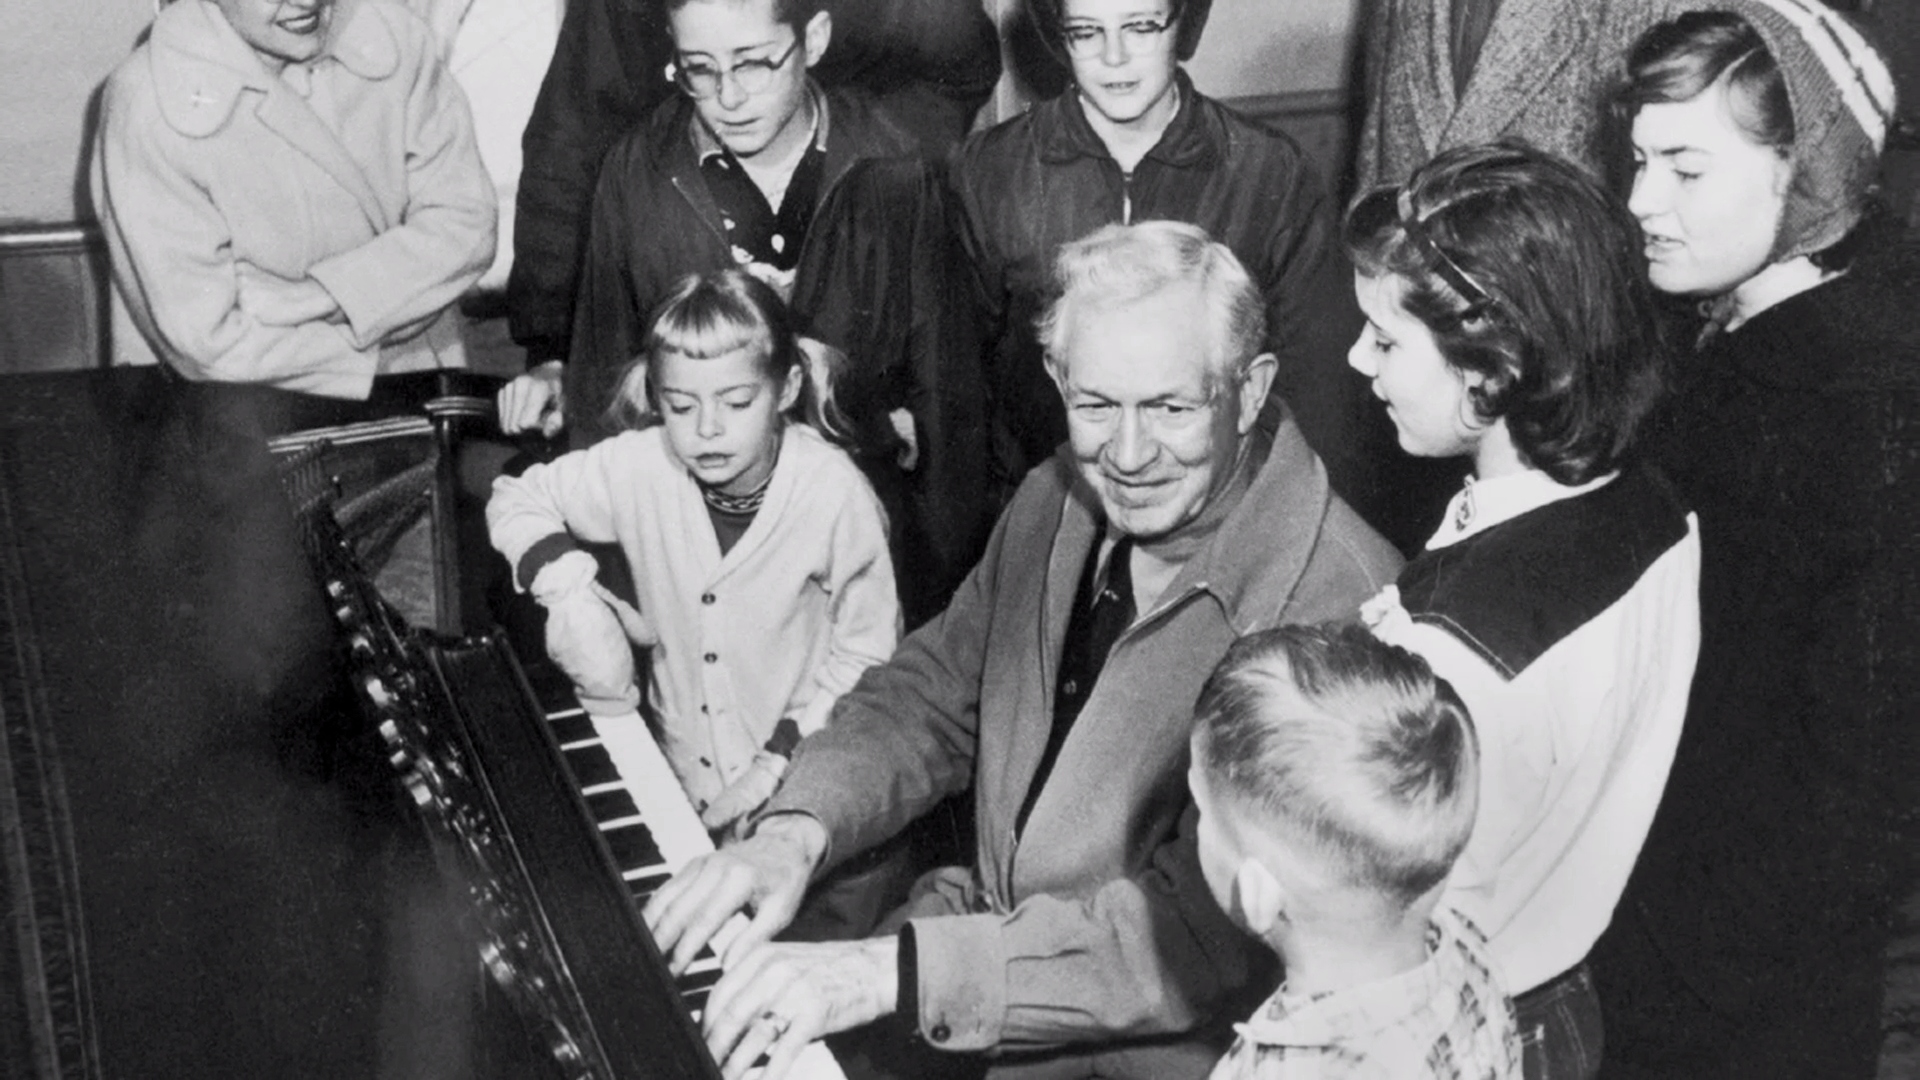 David O McKay playing the piano surrounded by family members